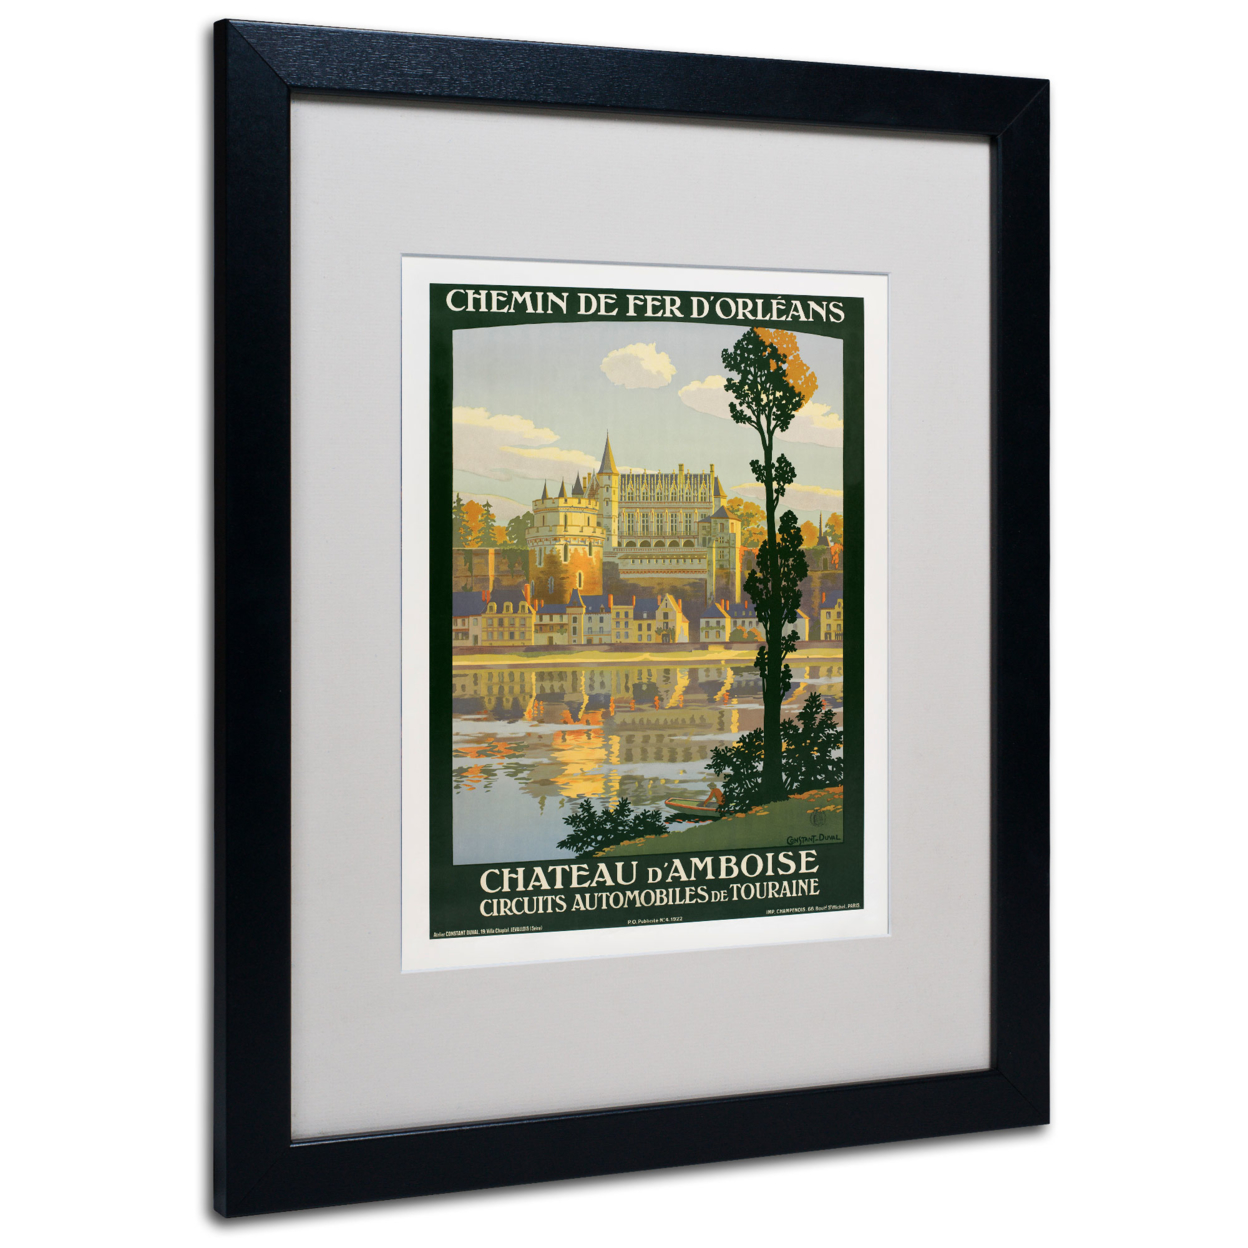 Chateau D'Amboise' Black Wooden Framed Art 18 X 22 Inches